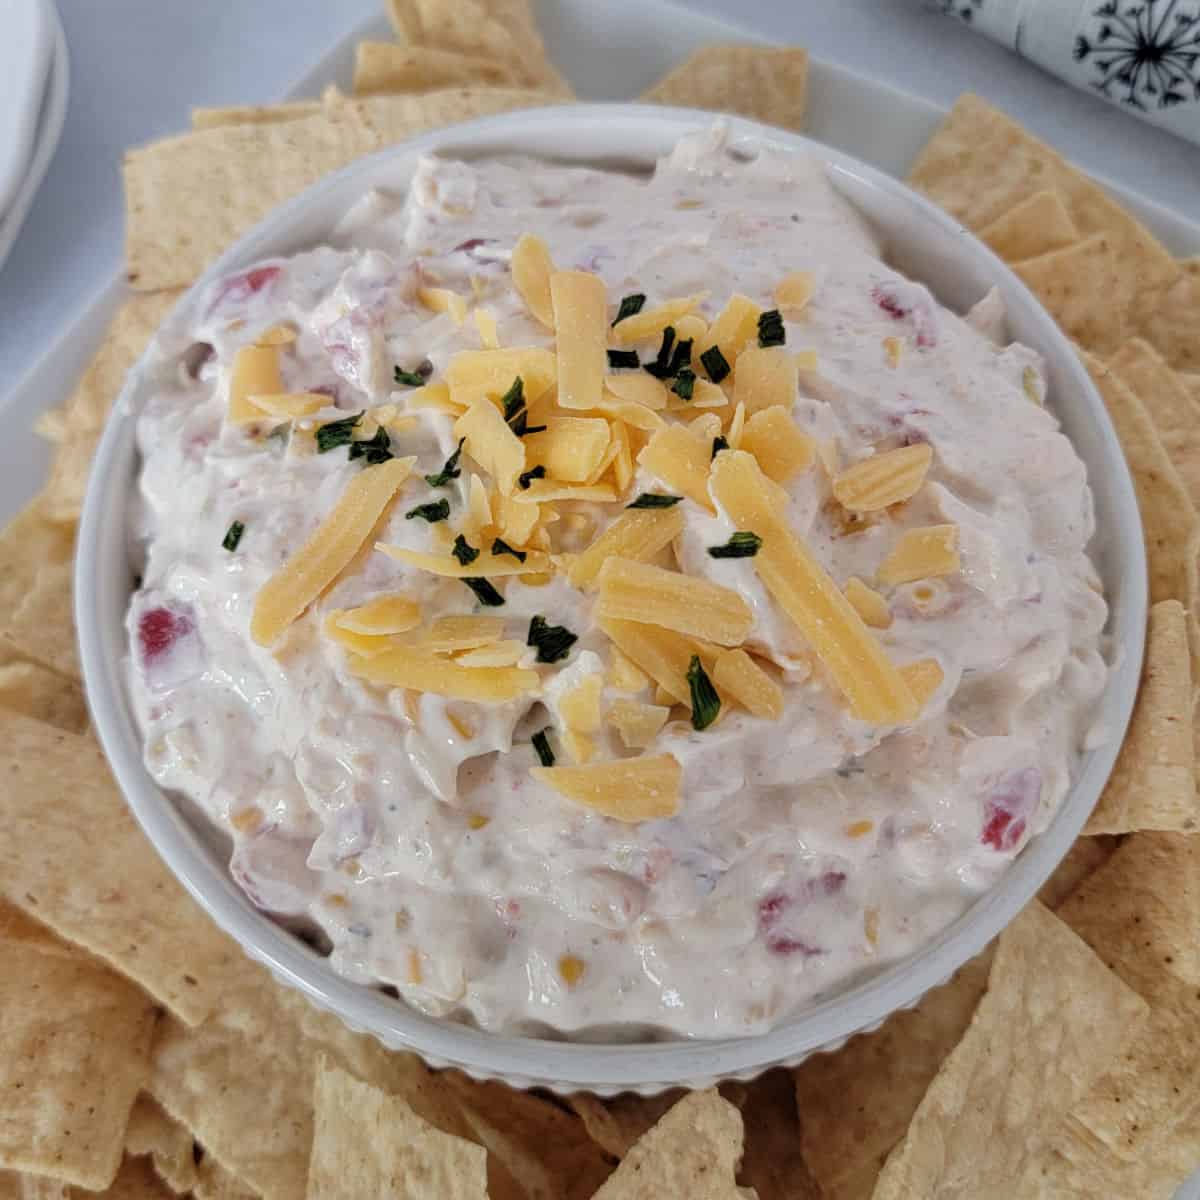 Fiesta Ranch Dip with shredded cheddar cheese garnish in a white bowl surrounded by tortilla chips